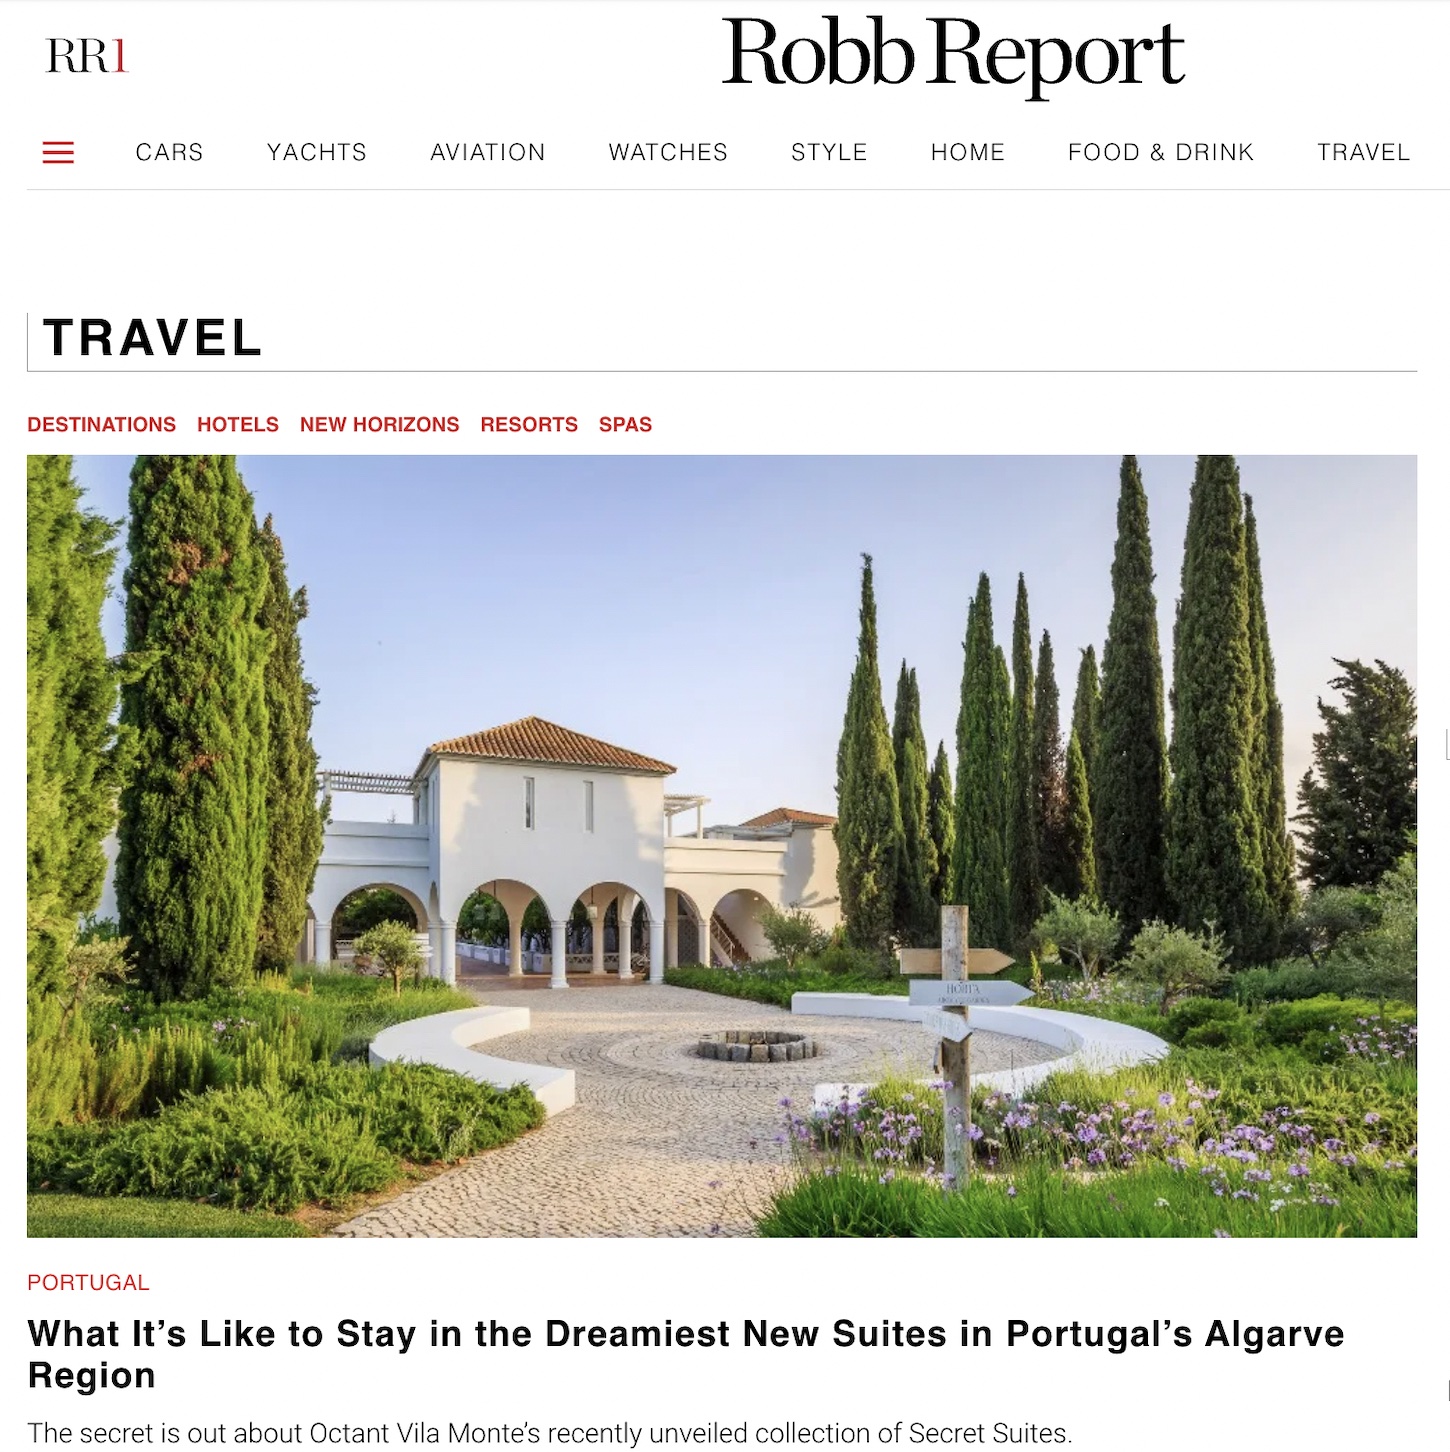 Robb Report: What It’s Like to Stay in the Dreamiest New Suites in Portugal’s Algarve Region